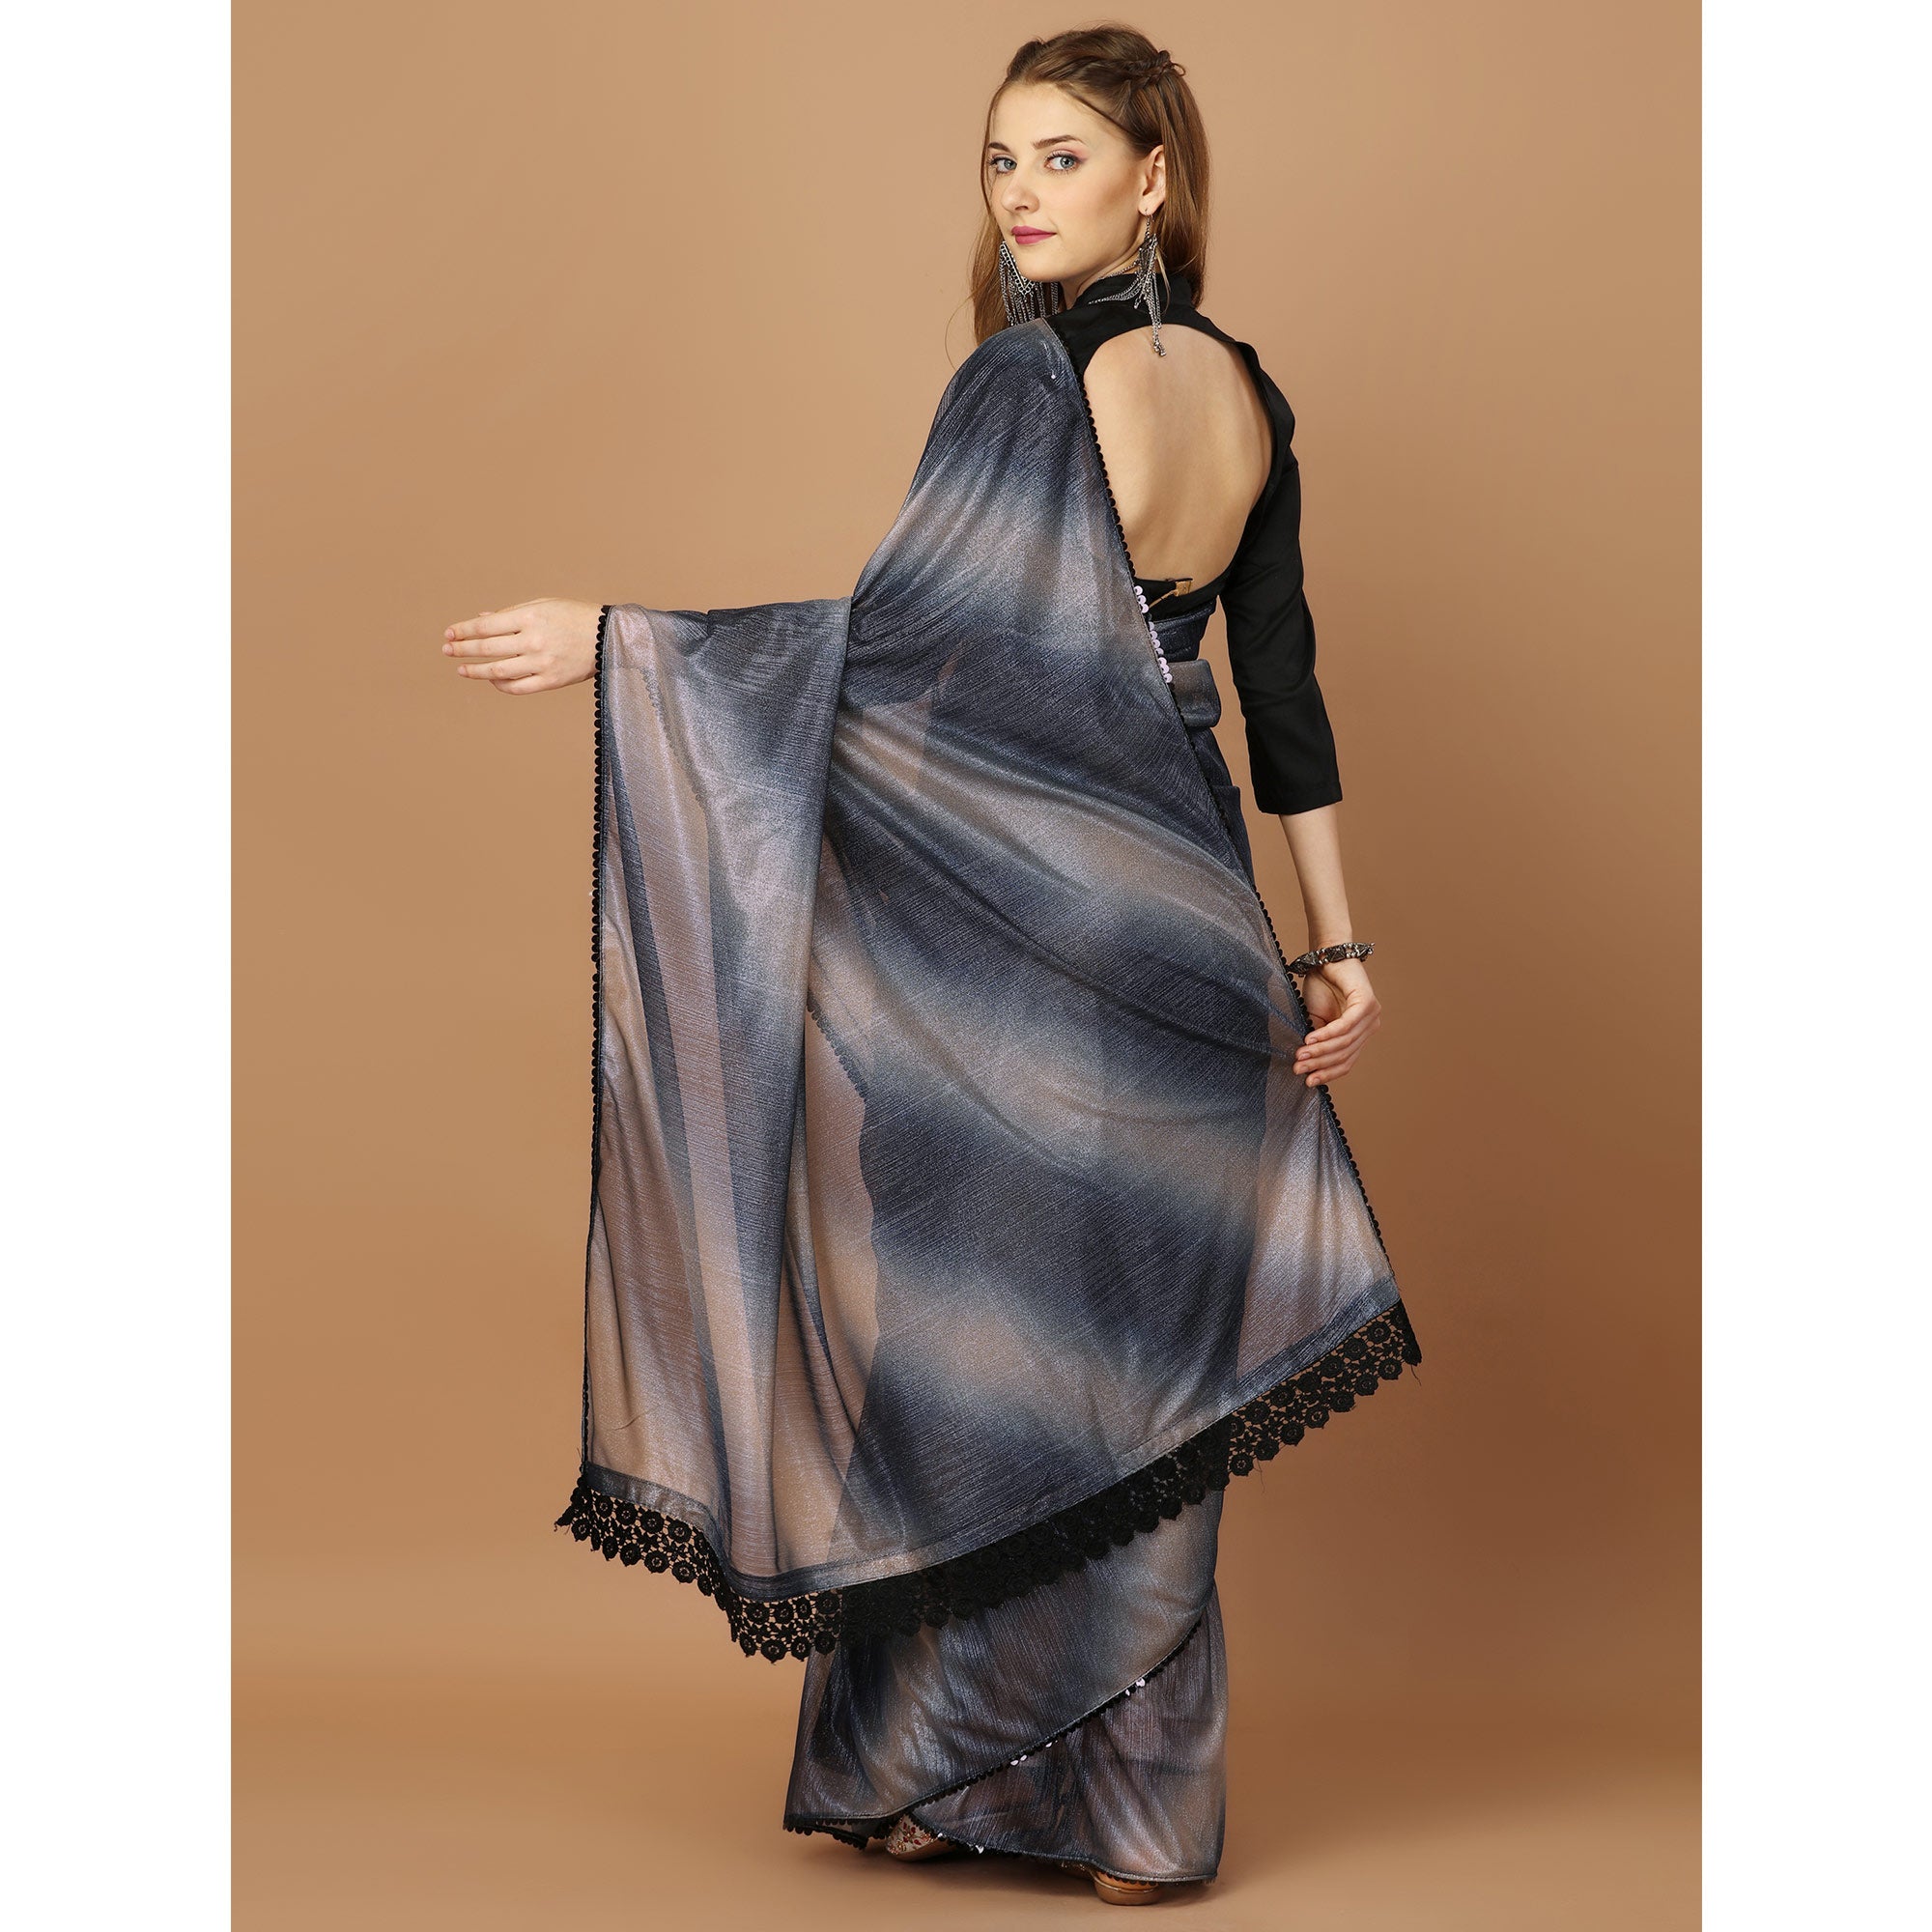 Blue Digital Printed Lycra Saree With Lace Border